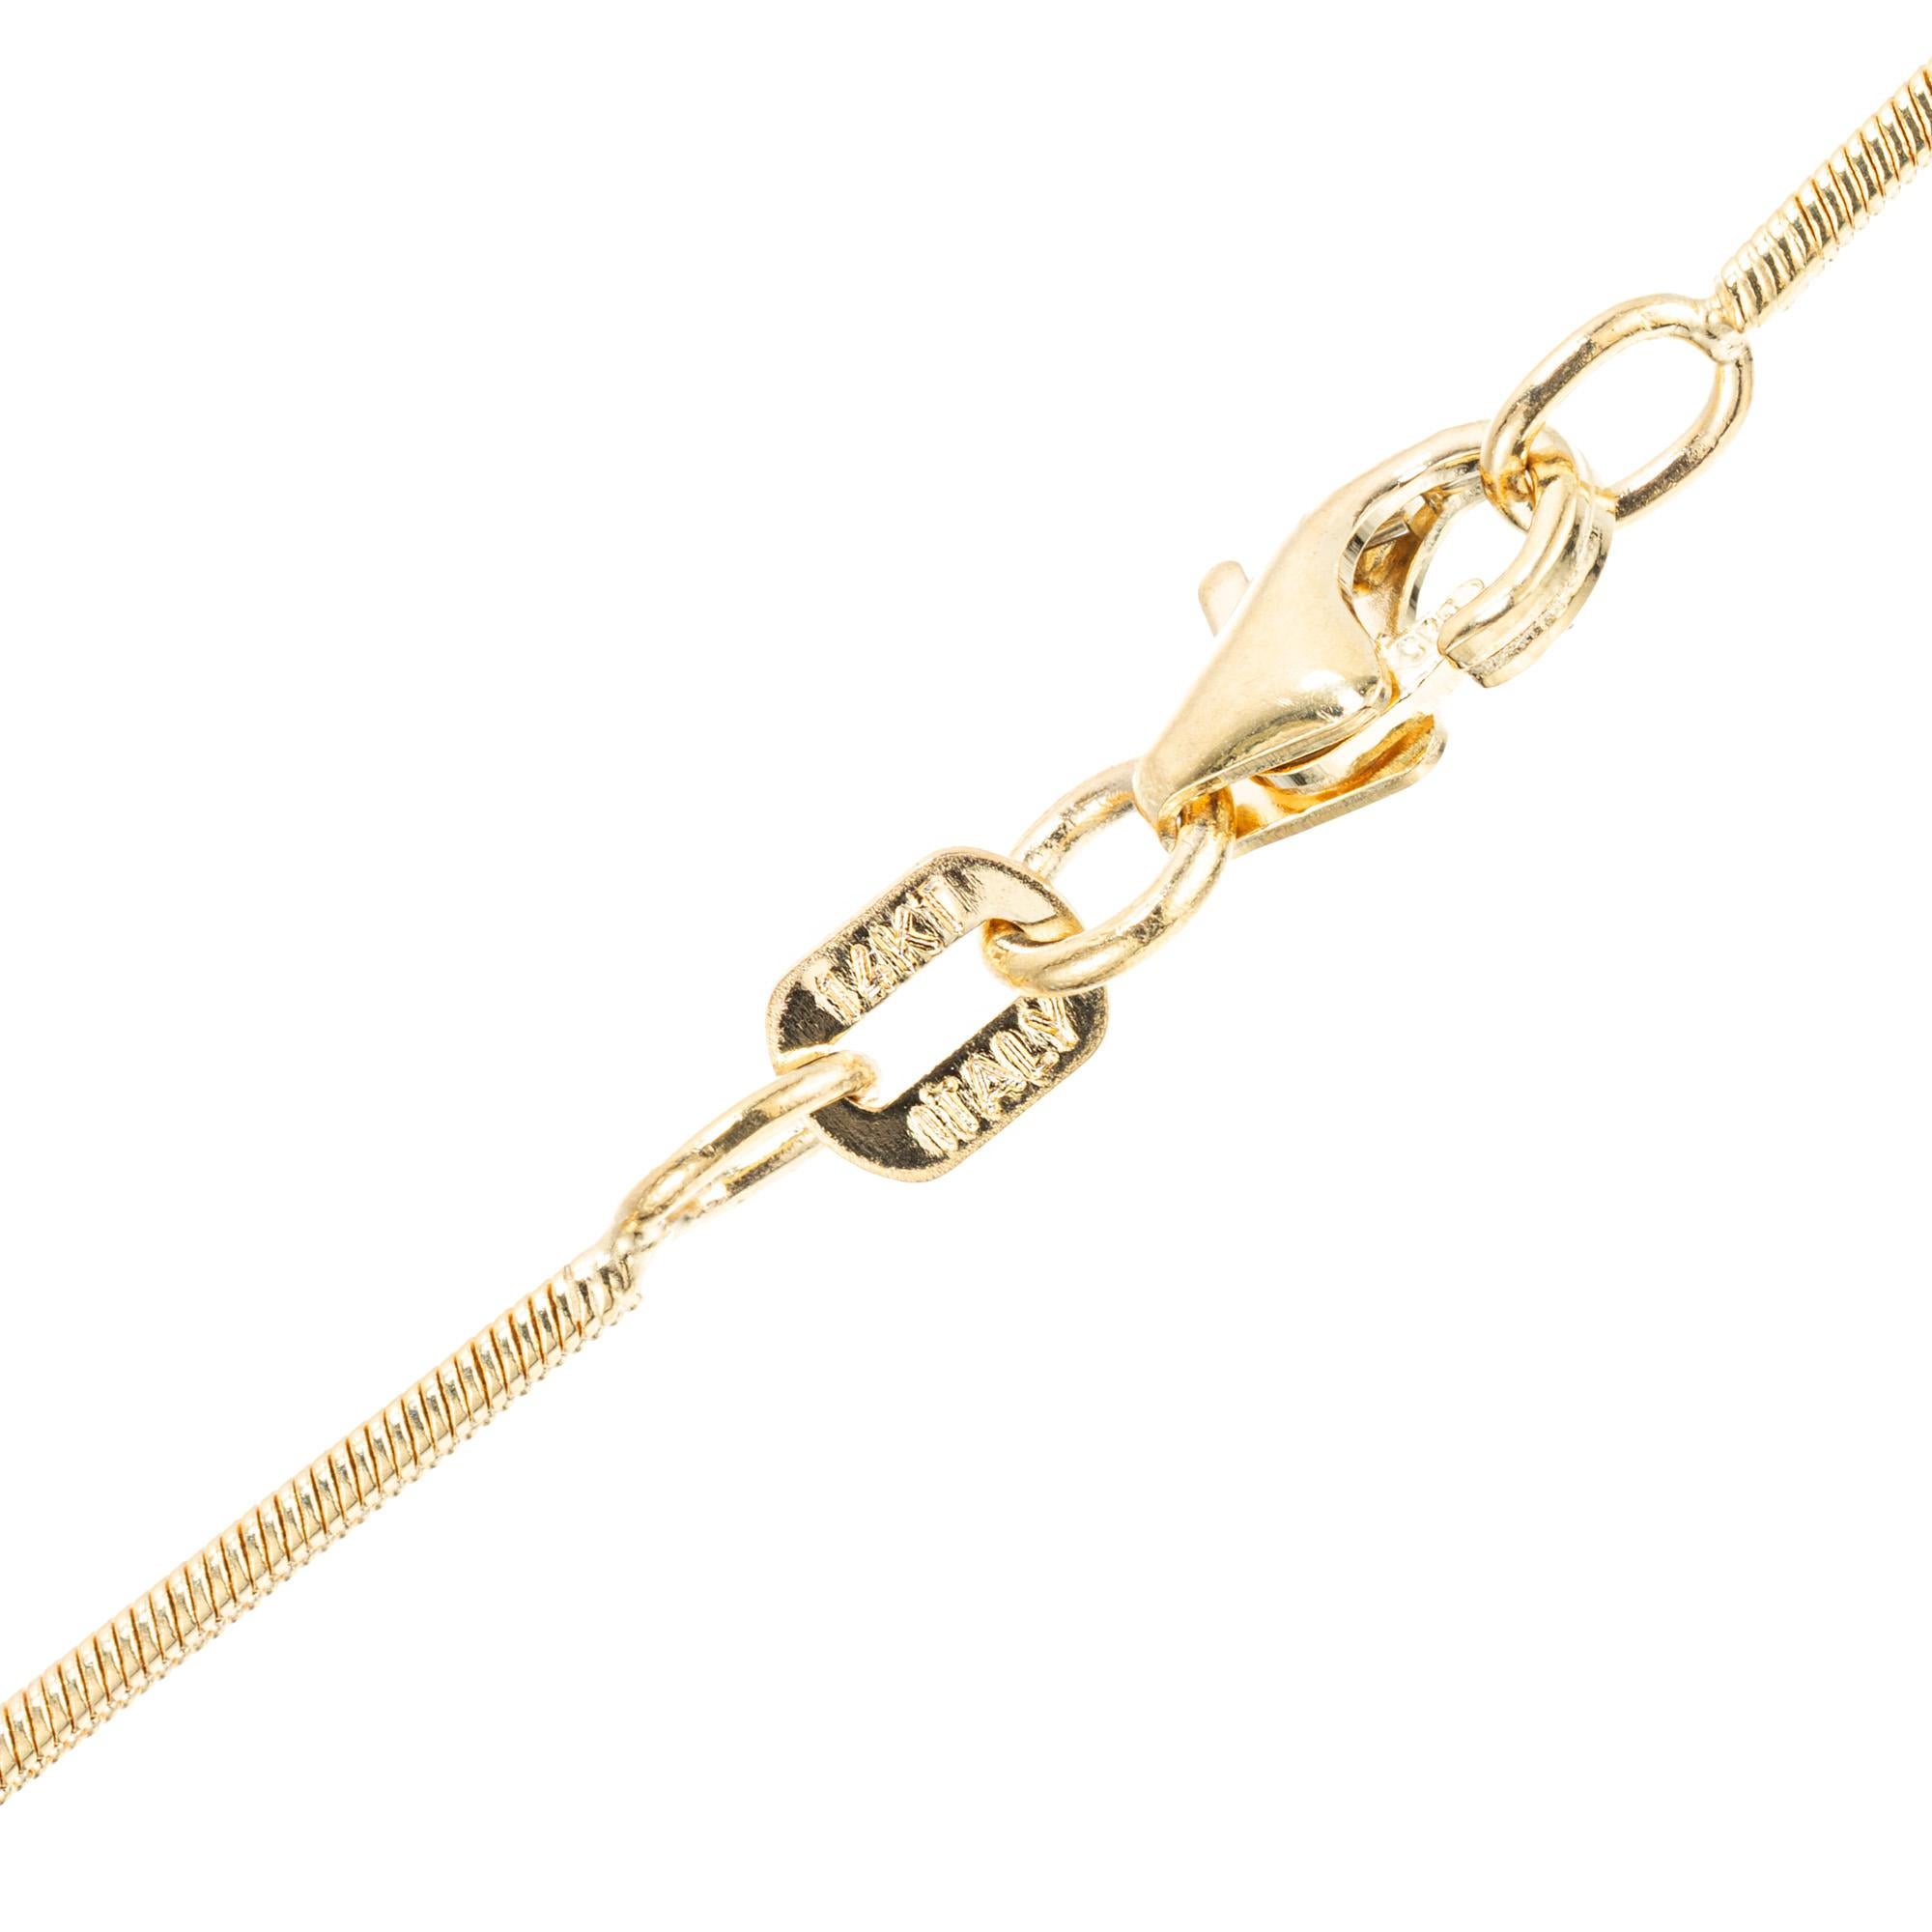 12.95 Carat Morganite Yellow Gold Pendant Necklace  In Good Condition For Sale In Stamford, CT